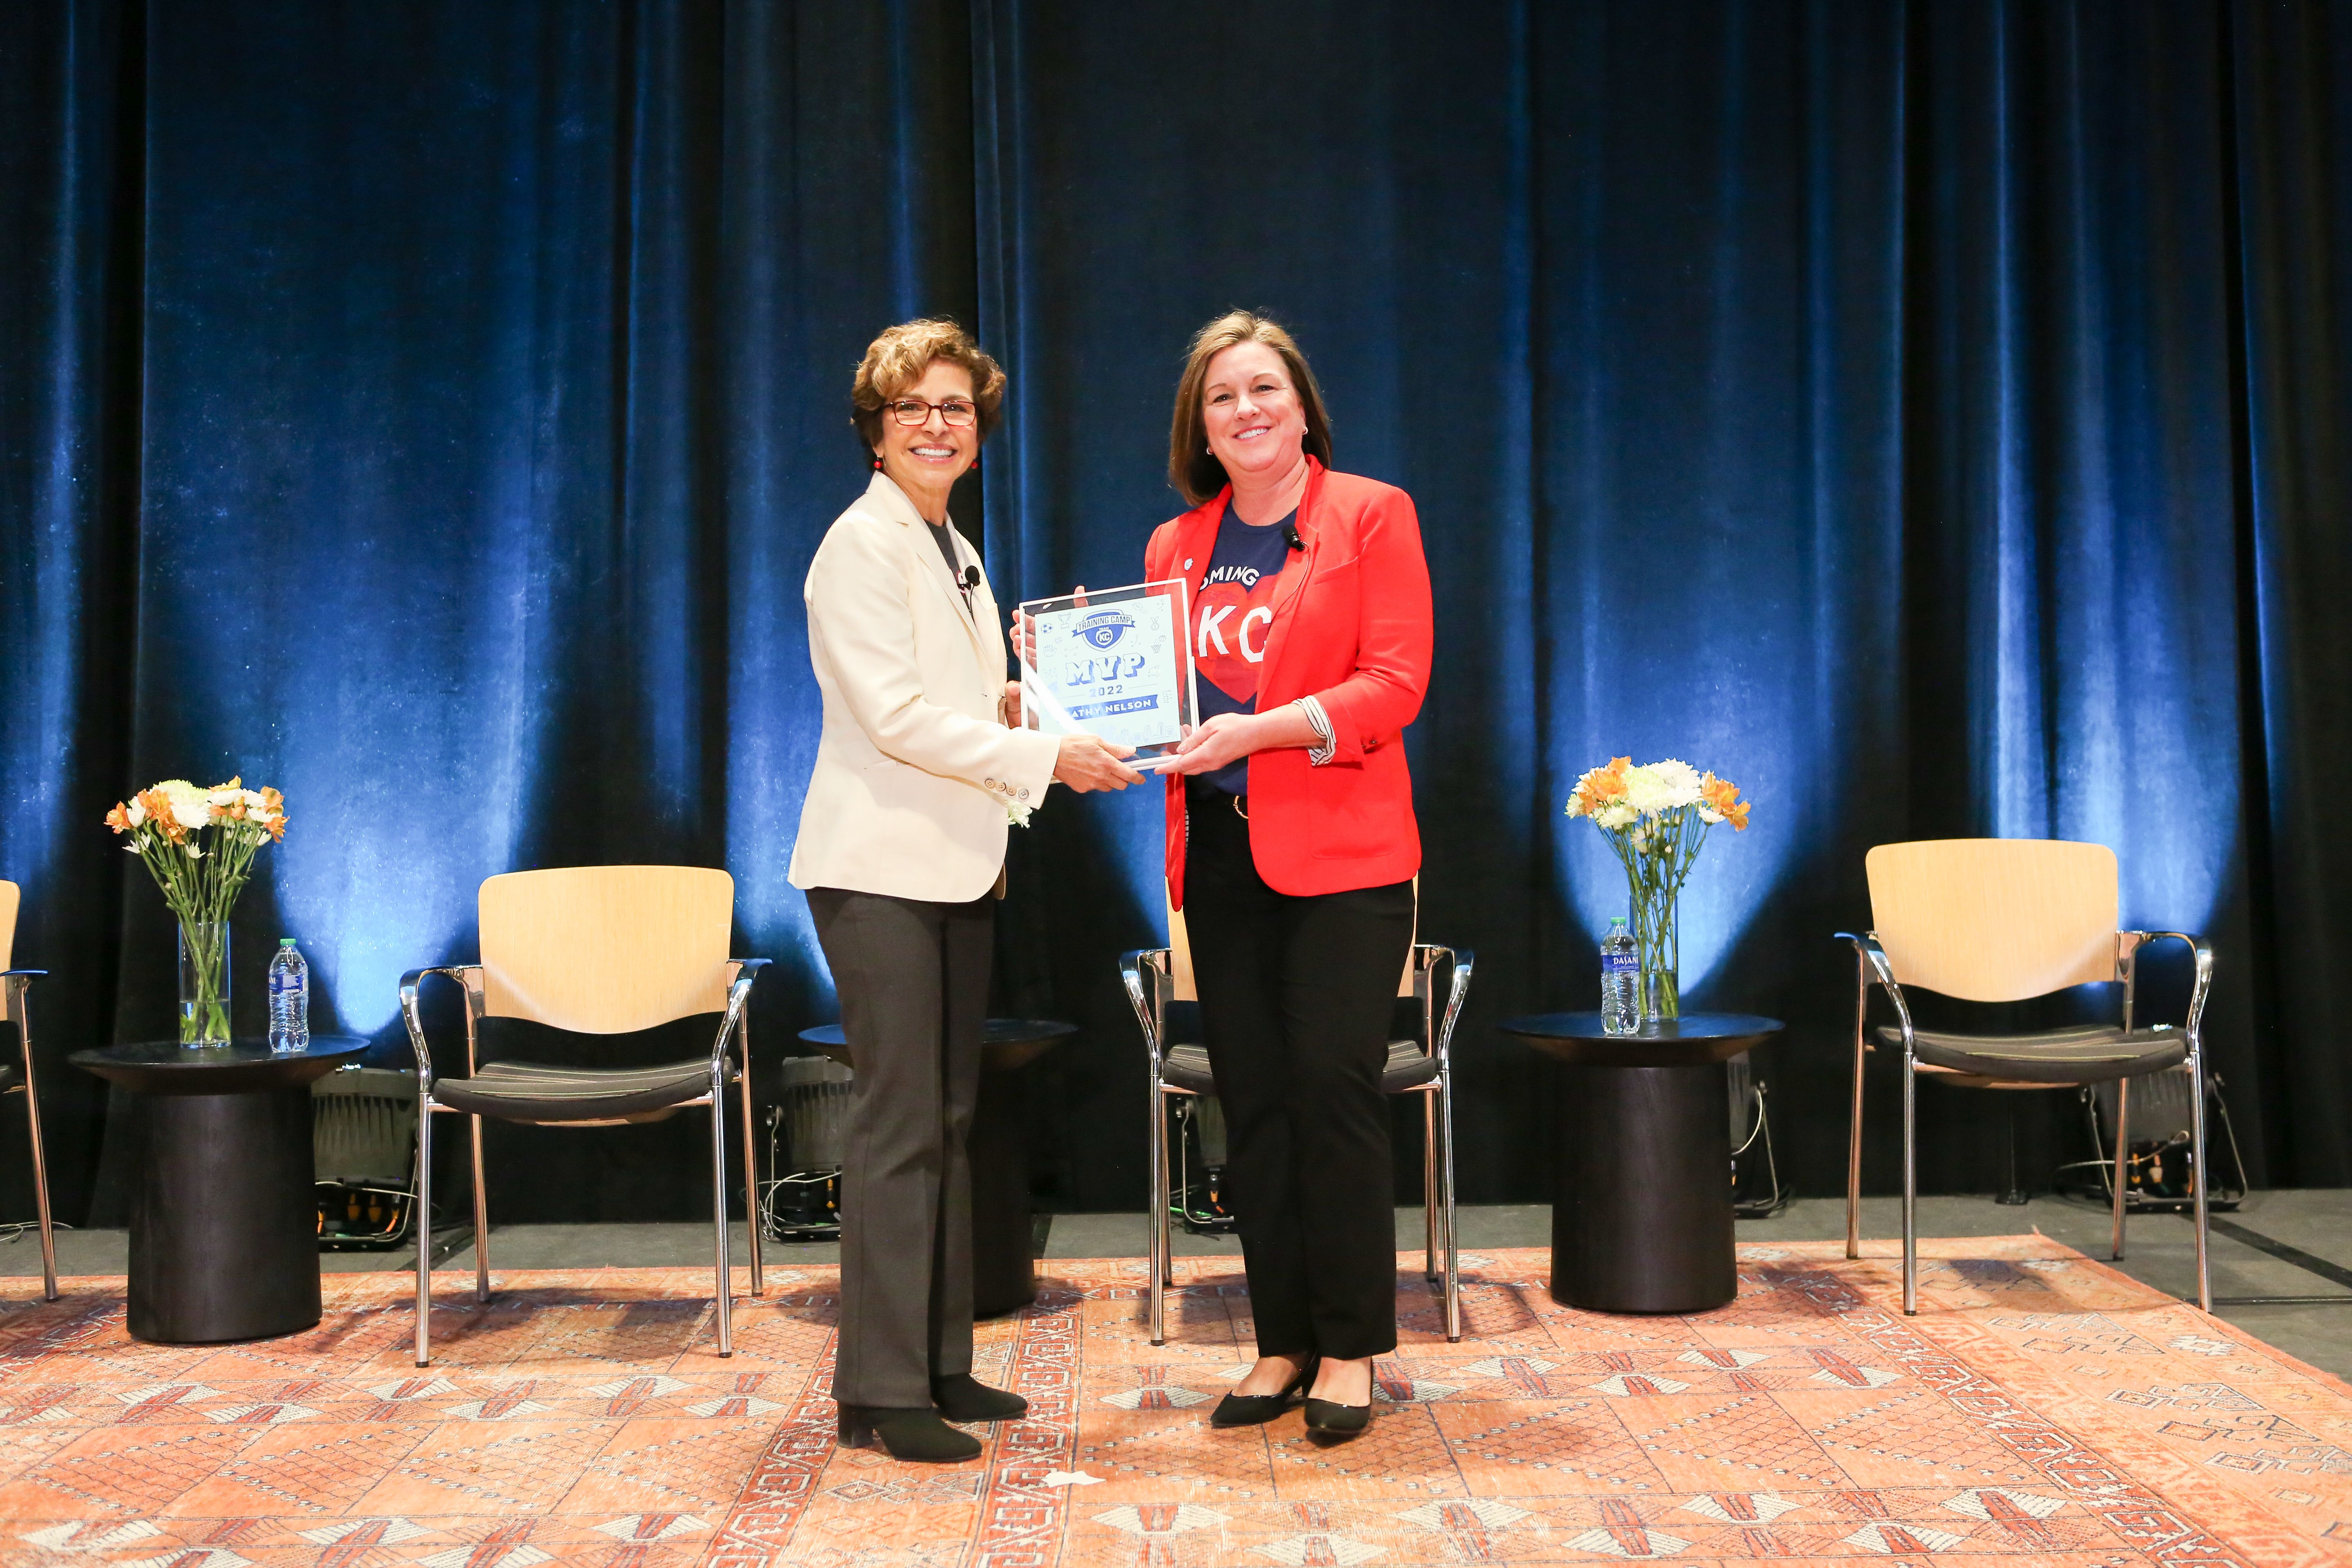 Kathy Nelson, president & CEO of Kansas City Sports Commission and Visit KC, was recognized as the TeamKC MVP for her continuing efforts to elevate the Kansas City region.